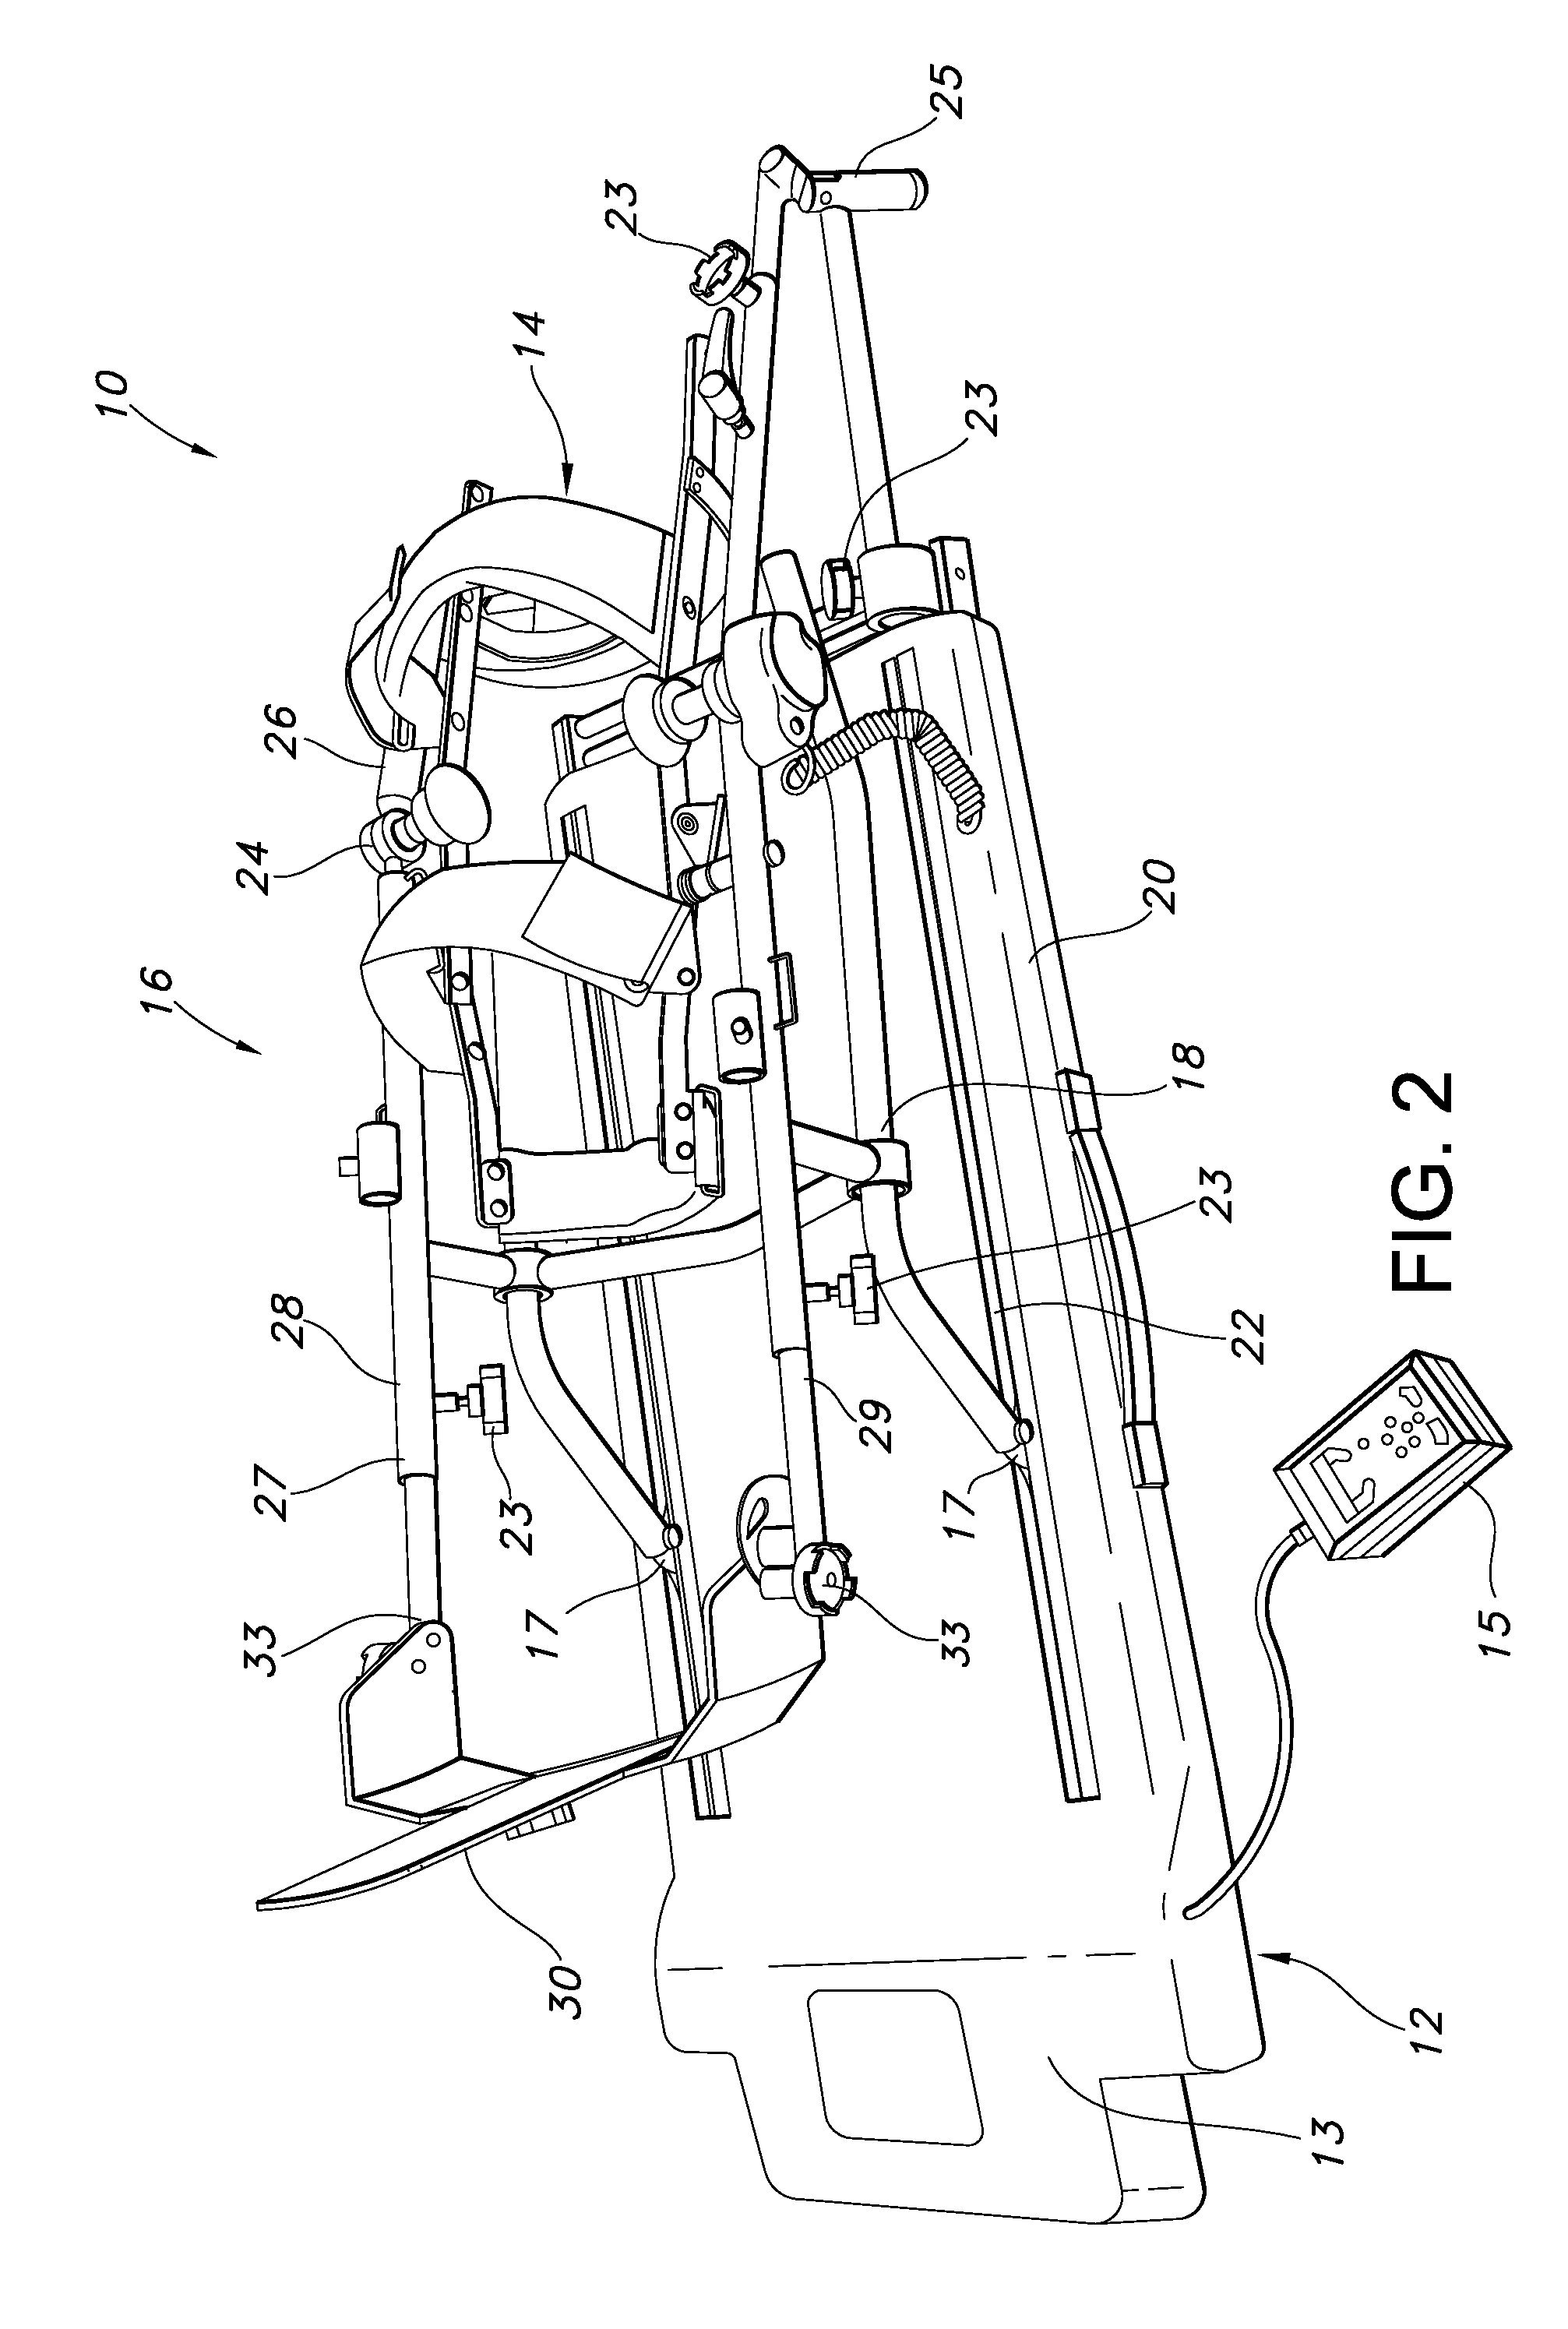 Knee extension assist device